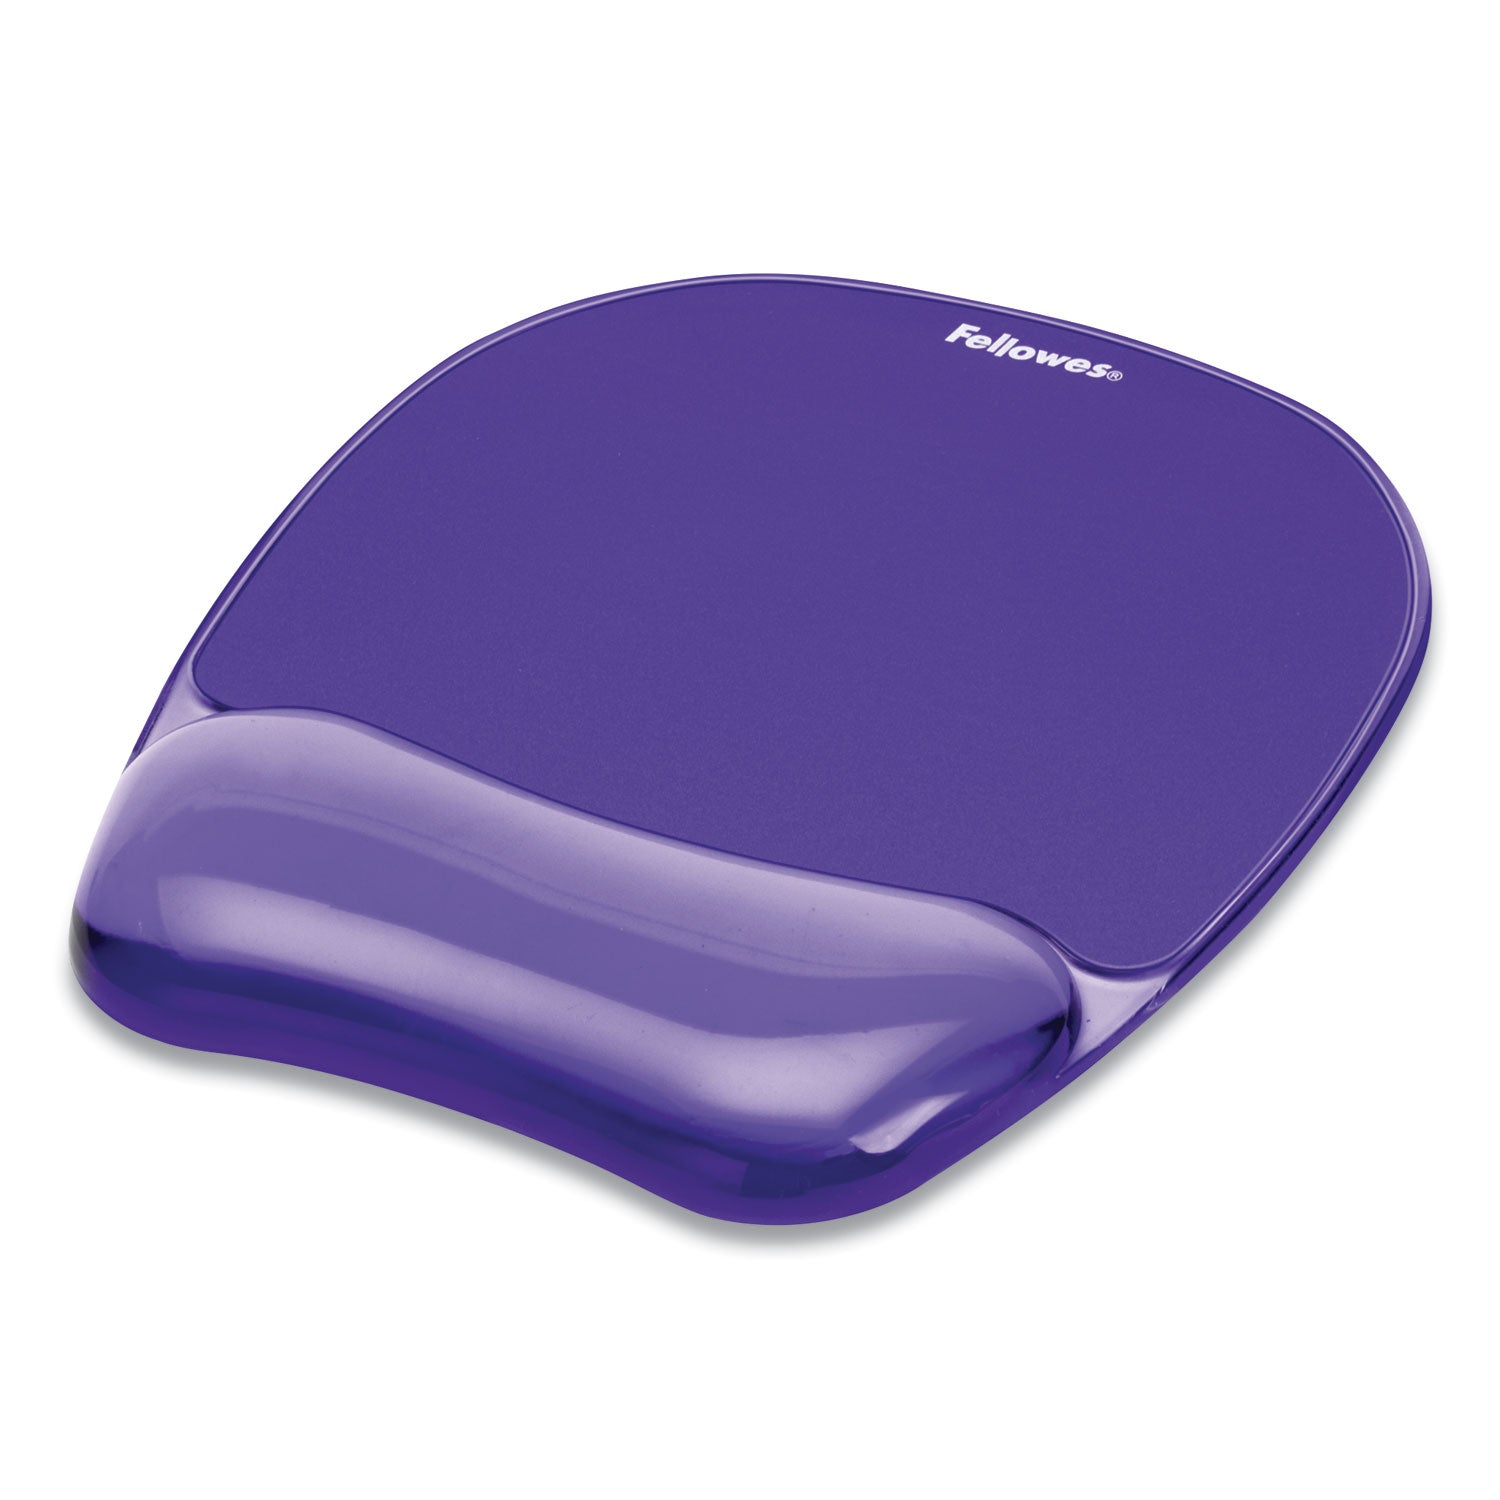 Gel Crystals Mouse Pad with Wrist Rest, 7.87 x 9.18, Purple - 